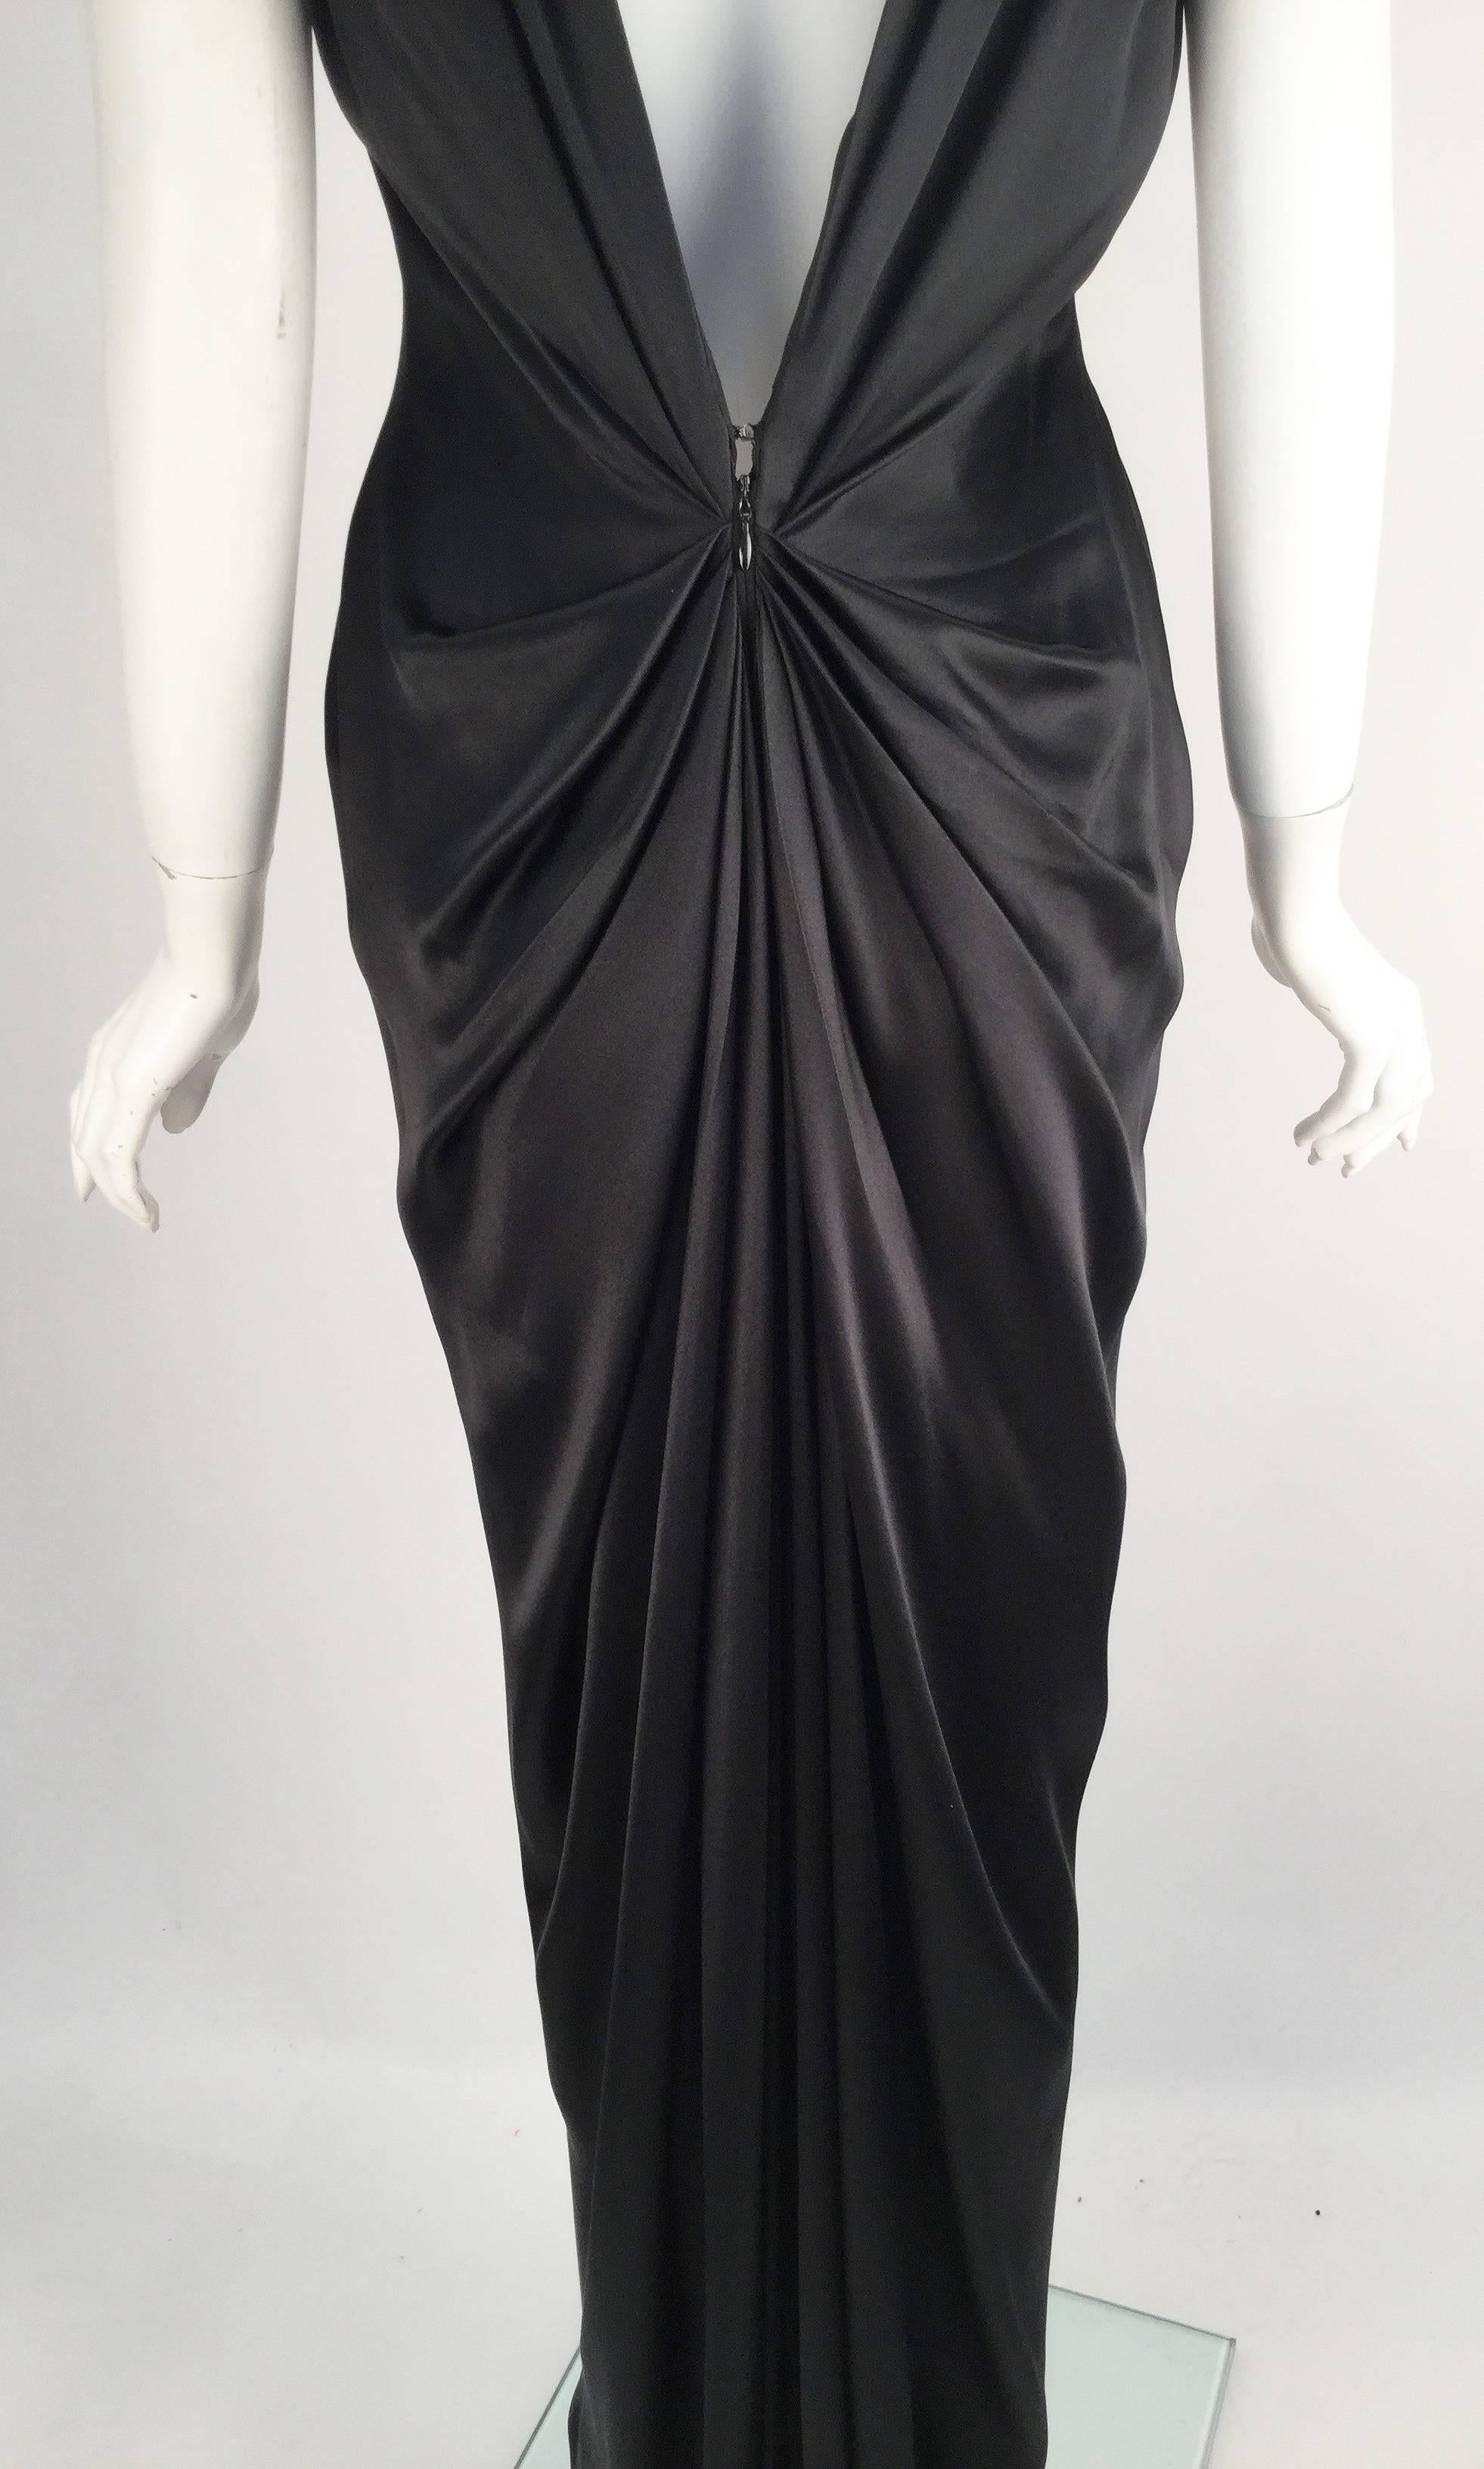 1990s Oscar de la Renta Backless Black Satin Evening Dress Gown In Good Condition For Sale In Houston, TX